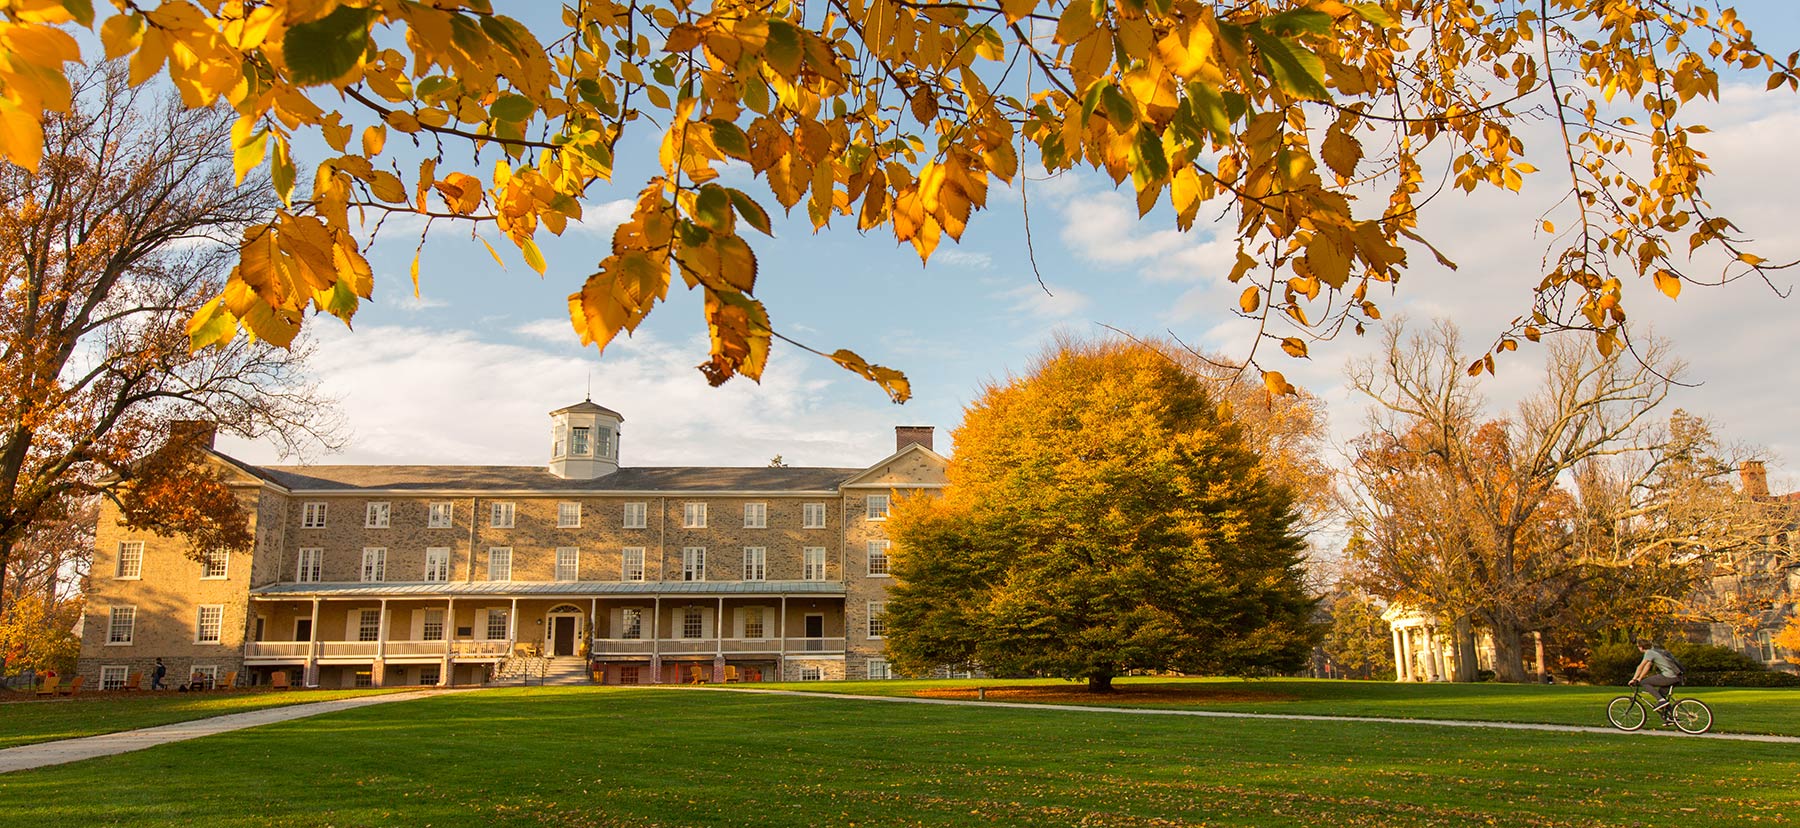 Founders Hall framed by fall foliage